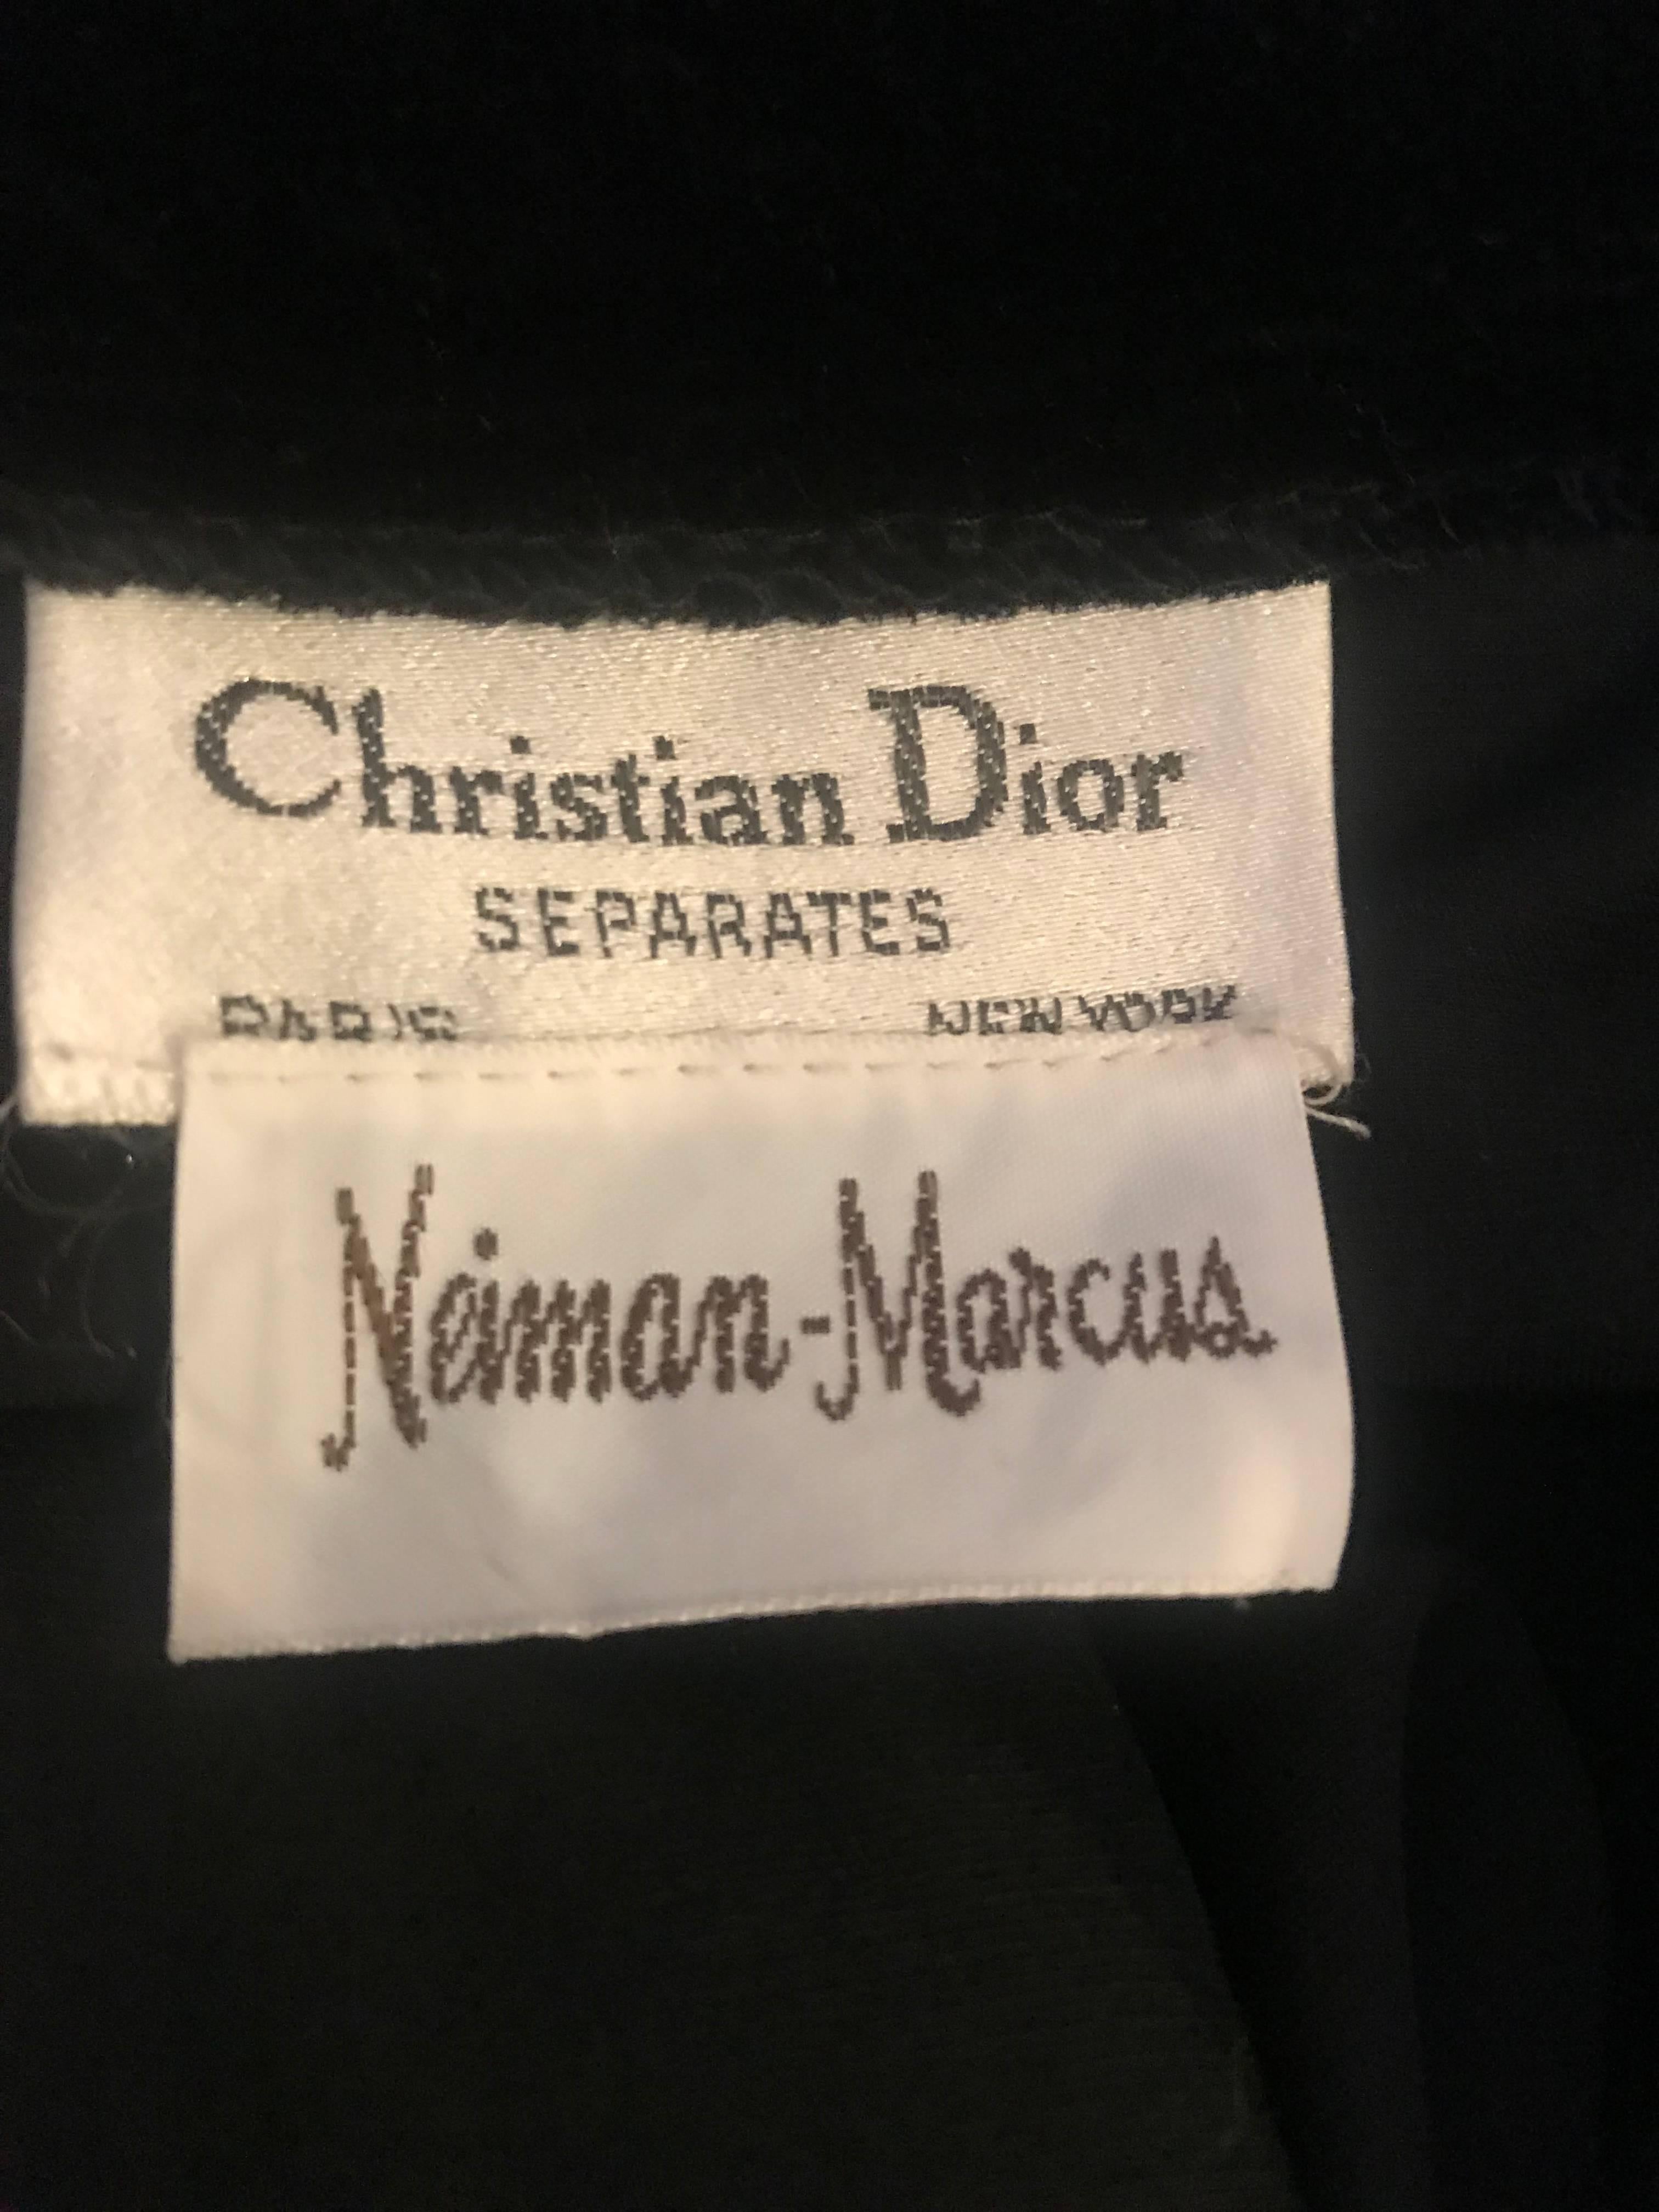 Chic 1990s / 90s CHRISTIAN DIOR black silk velvet trousers! Timeless fit features a slight high rise waist, with straight legs. Pockets at each slide of the hip. Hidden interior button at side with hook-and-eye closure. The perfect classic pair of